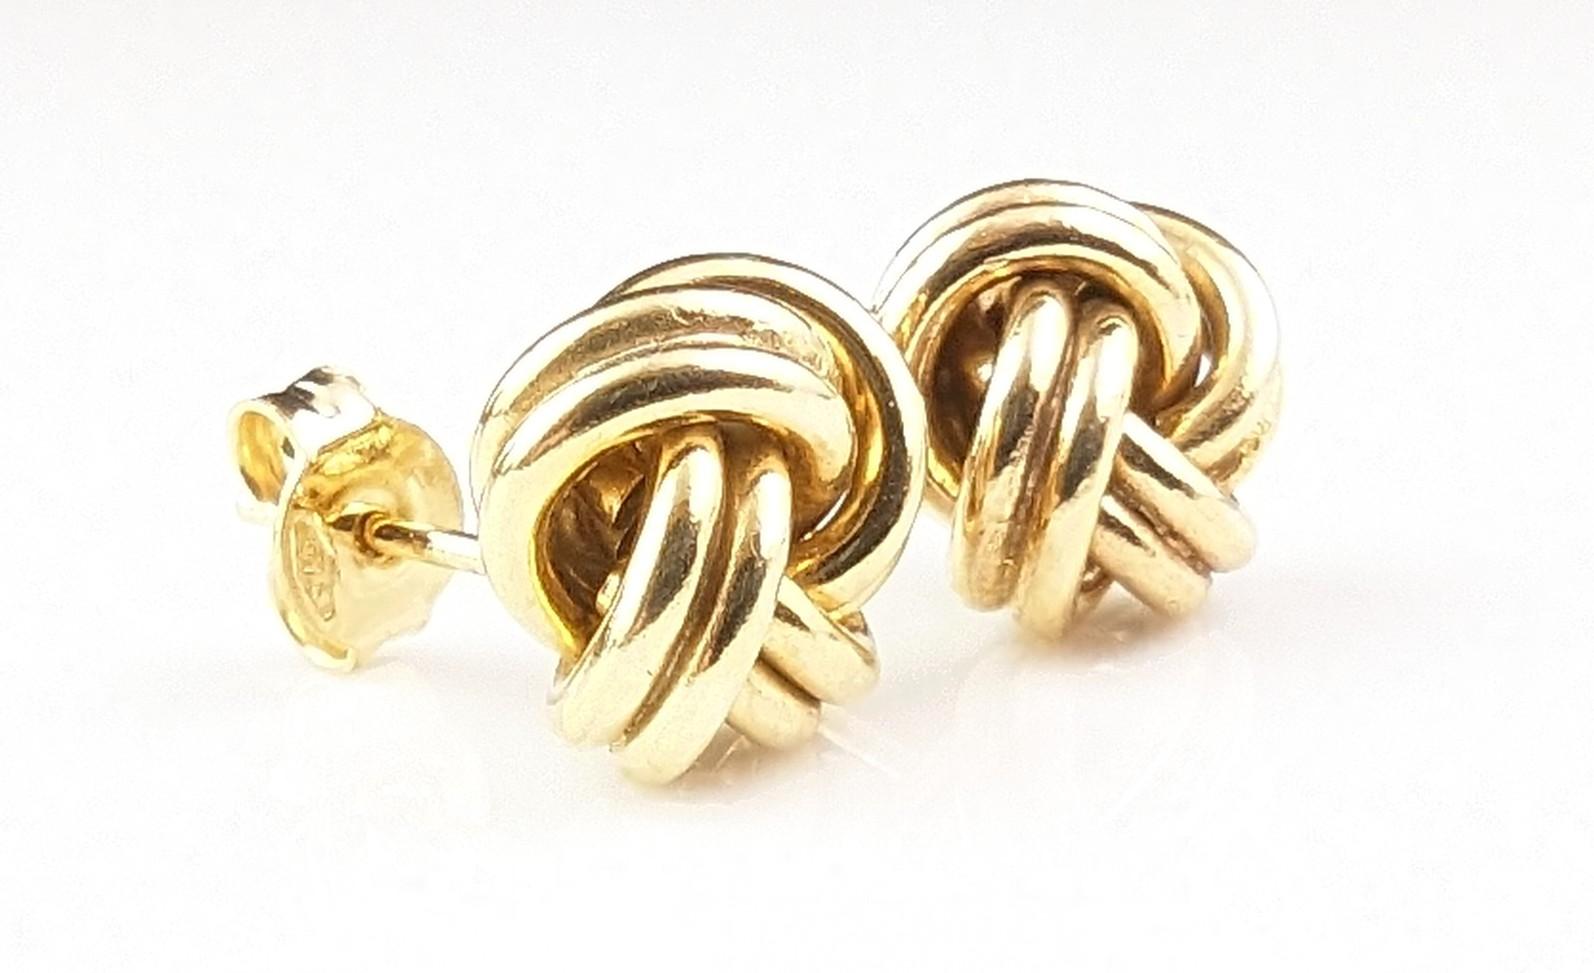 Vintage 9k yellow gold knot earrings, studs  6